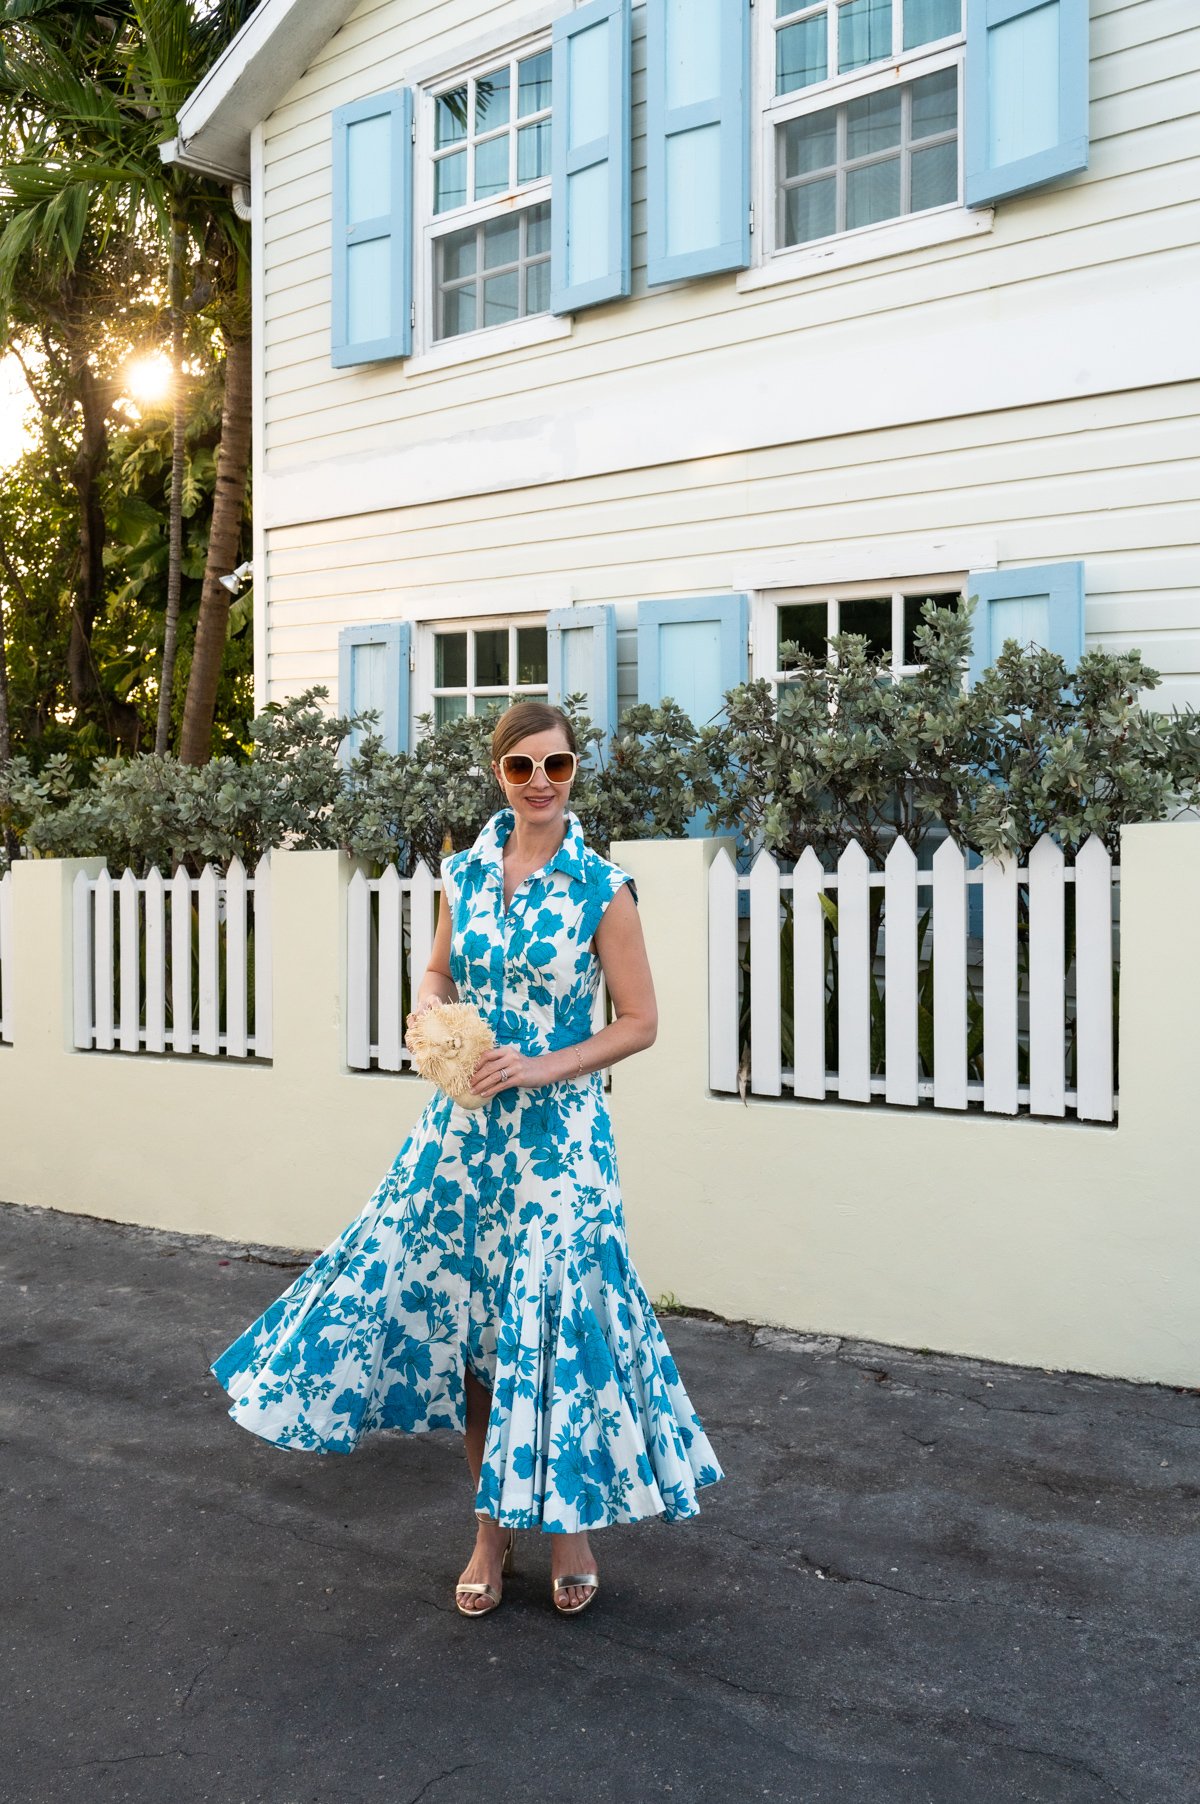 My Favorite Floral Spring Dresses… – The Blue Hydrangeas – A